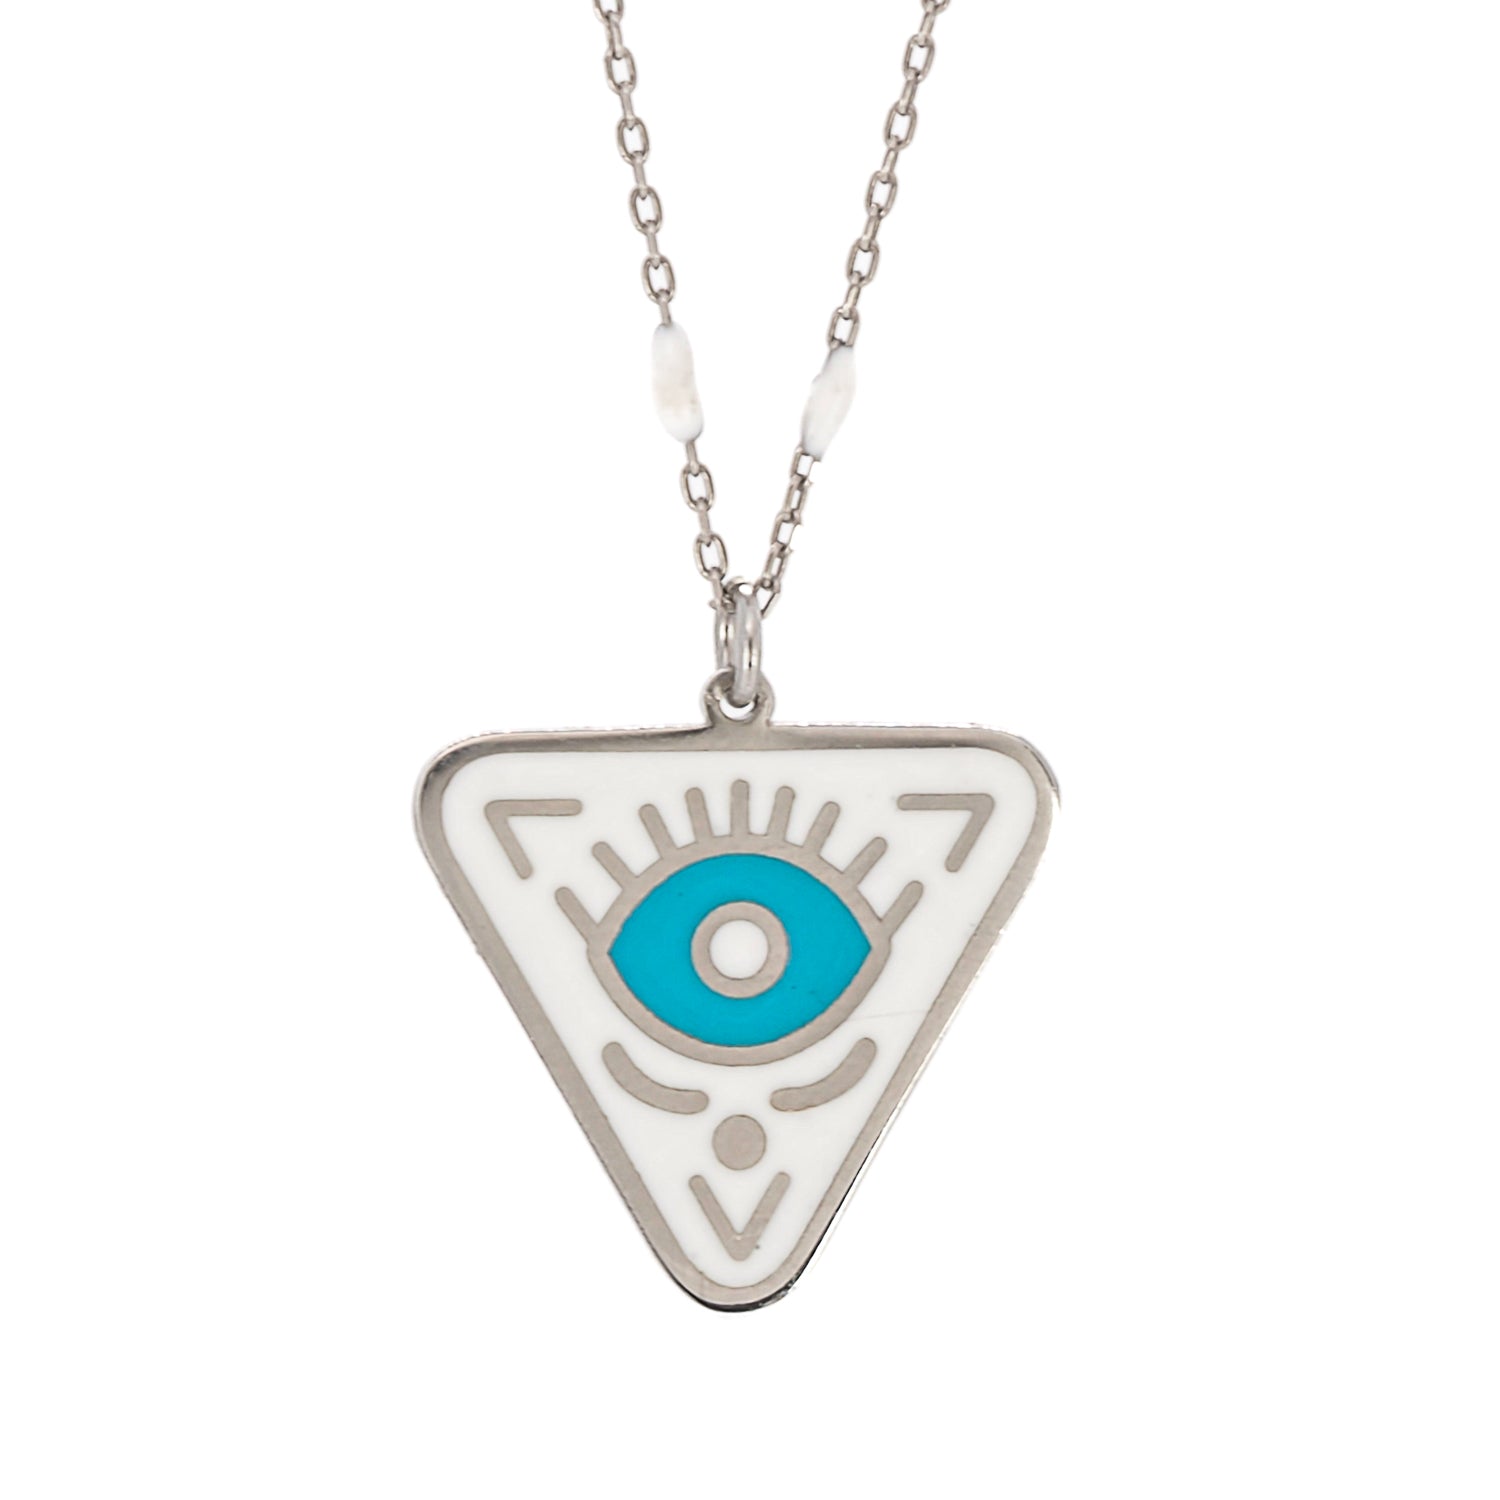 Calming Evil Eye Sterling Silver Necklace - Elegance meets protection.